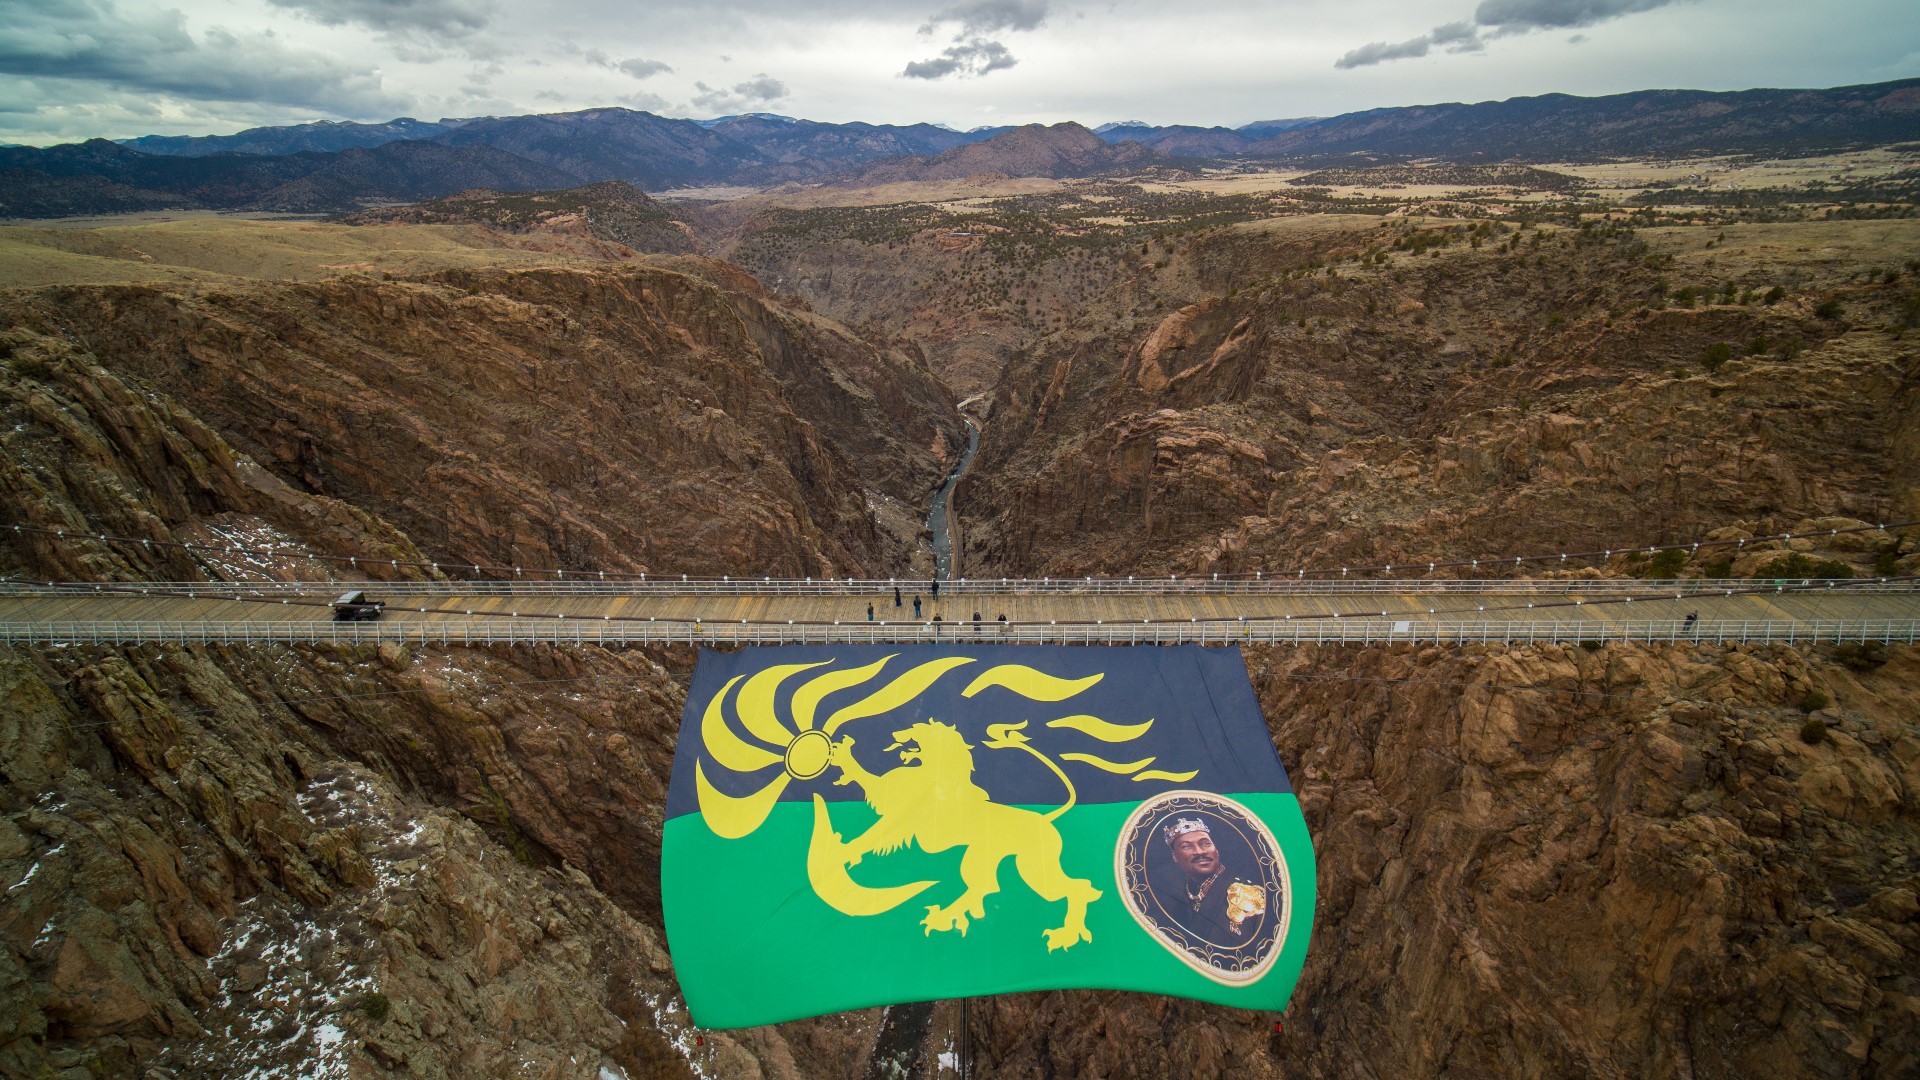 A flag for the new movie 'Coming 2 America' flies at the Royal Gorge Bridge in southern Colorado on Friday, March 5, 2021.